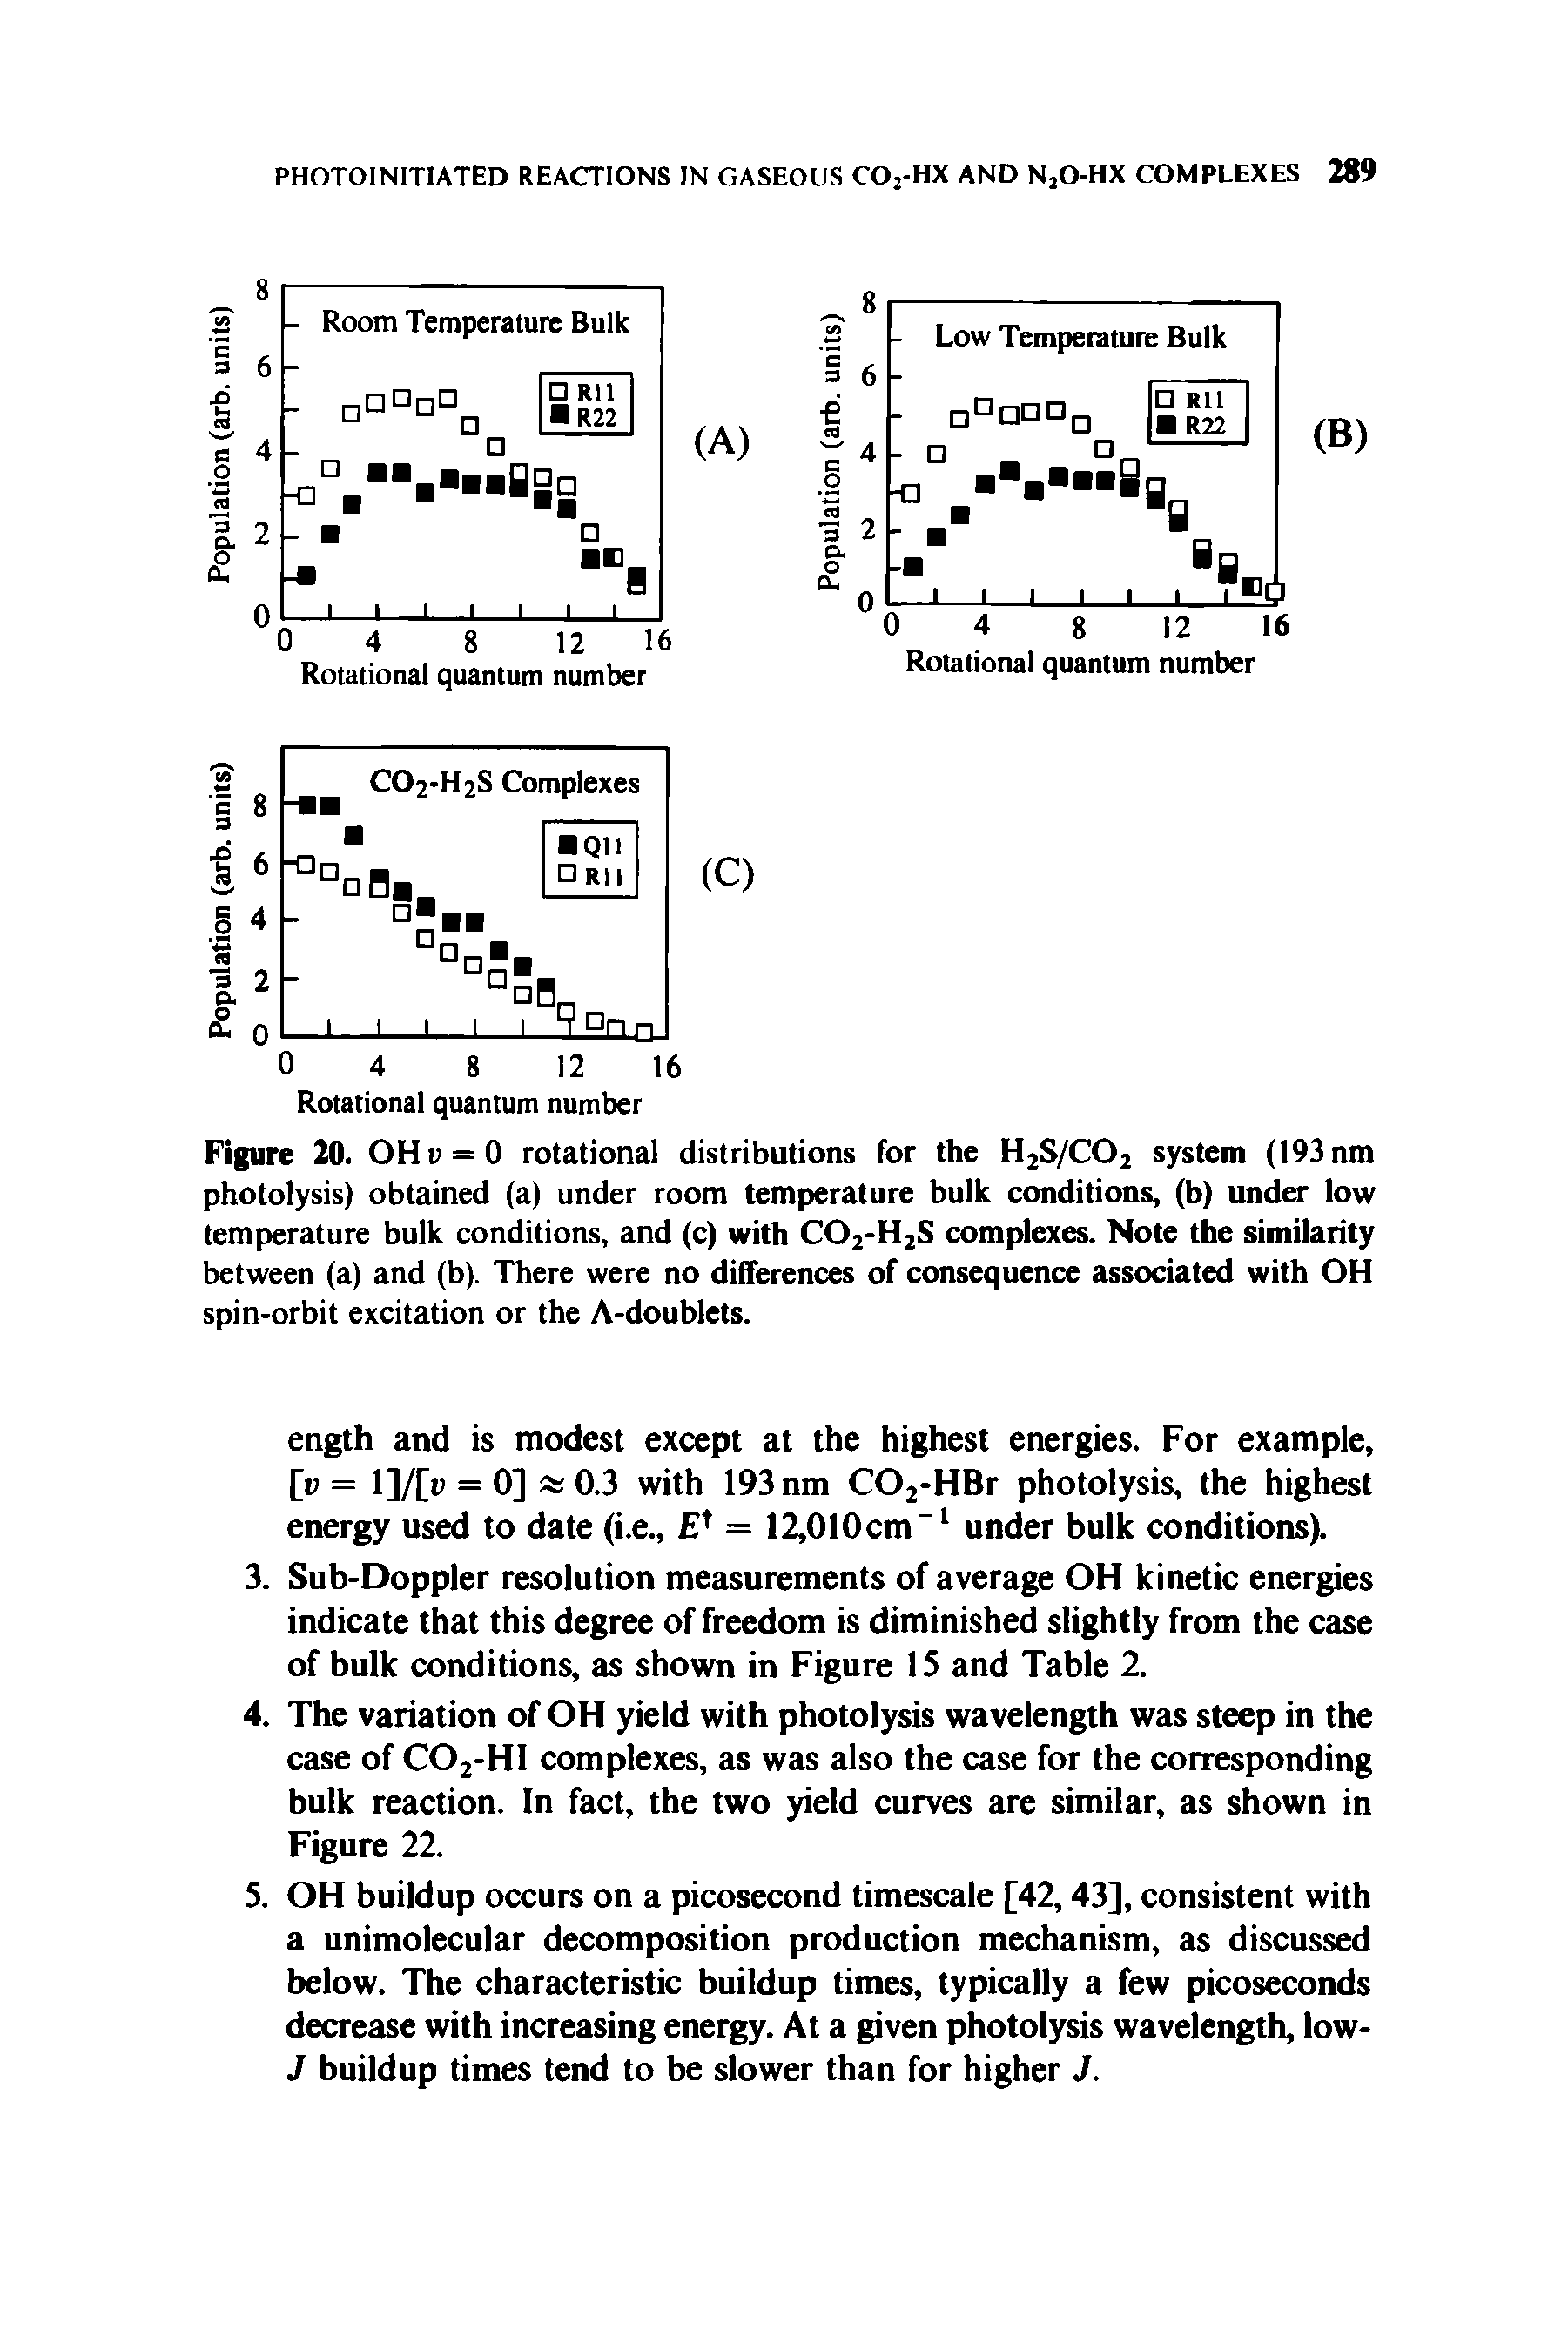 Figure 20. OHu = 0 rotational distributions for the H2S/CO2 system (193nm photolysis) obtained (a) under room temperature bulk conditions, (b) under low temperature bulk conditions, and (c) with CO2-H2S complexes. Note the similarity between (a) and (b). There were no differences of consequence associated with OH spin-orbit excitation or the A-doublets.